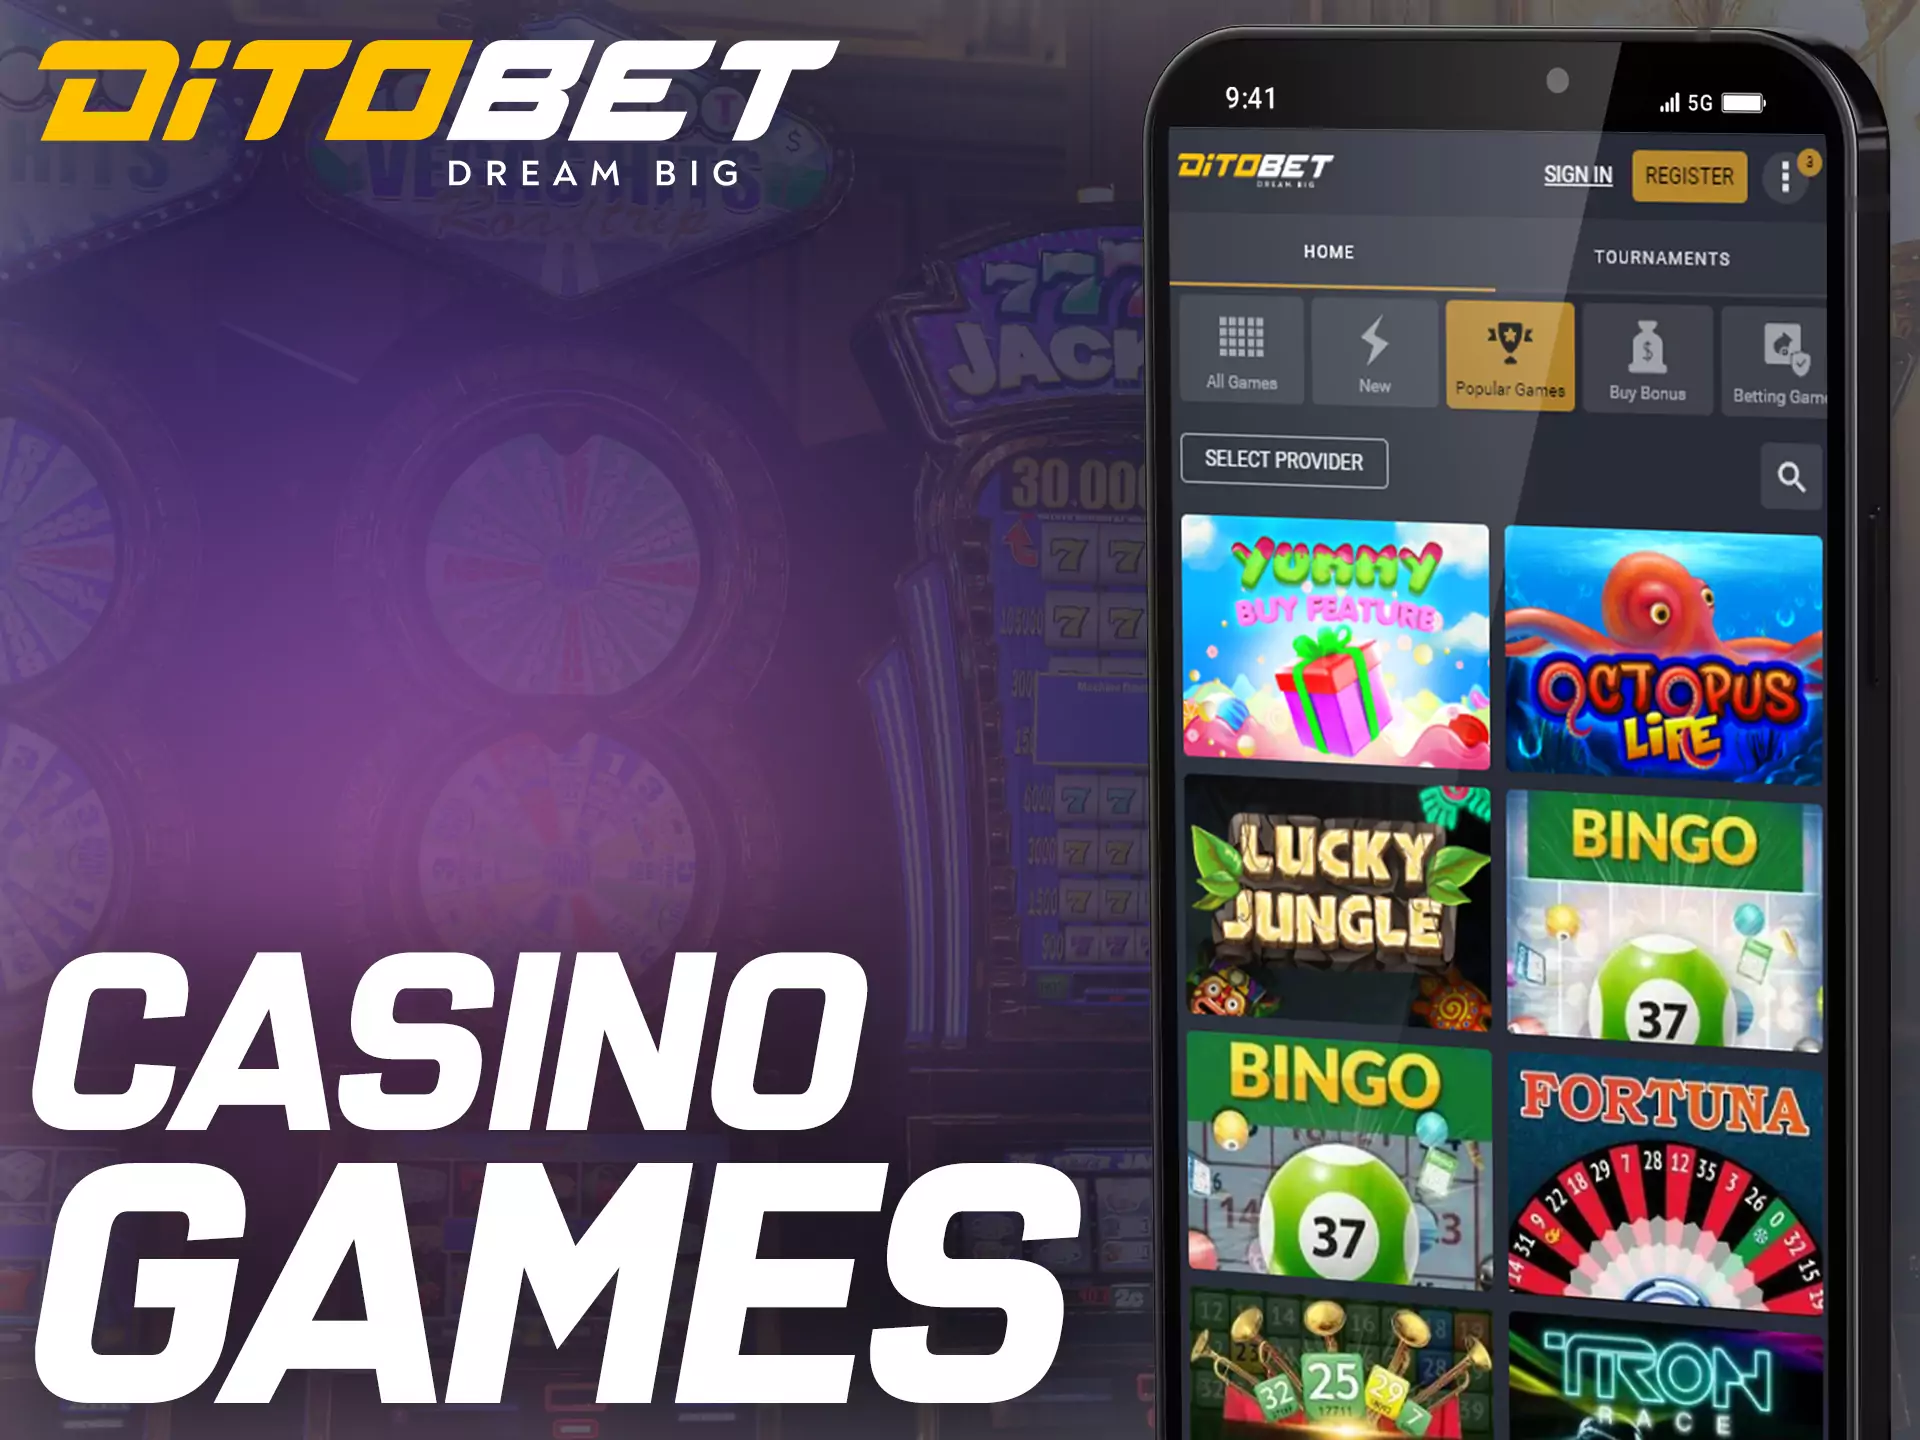 Try all the games at Ditobet Casino and find your favorite one.